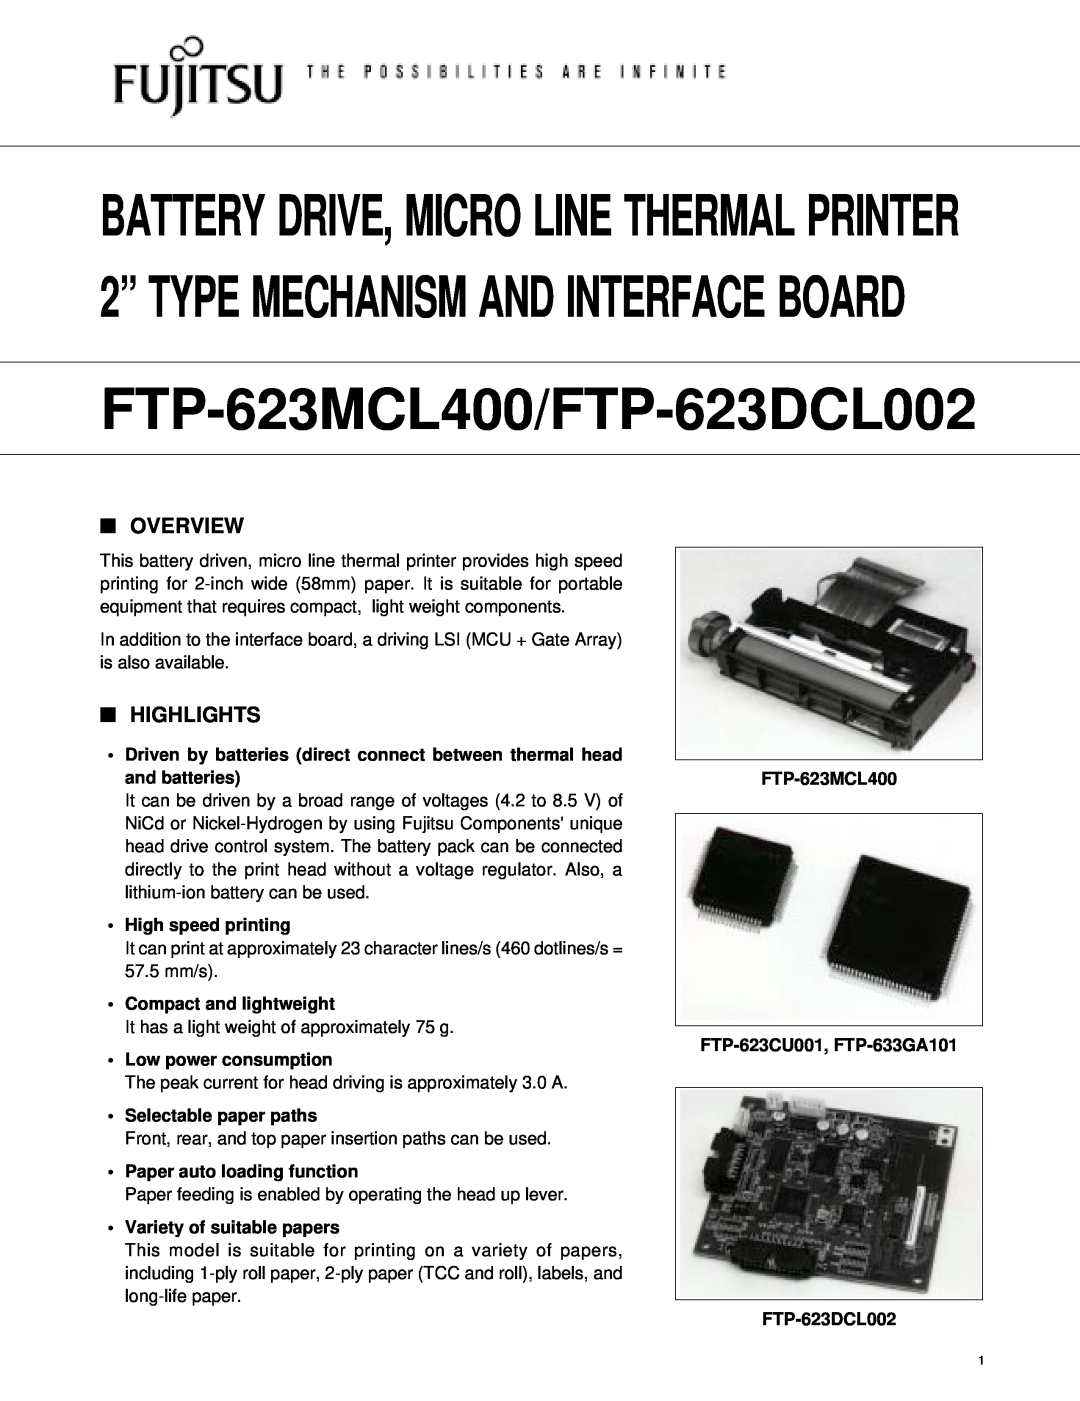 Fujitsu FTP-623DCL002 manual Overview, Highlights, Driven by batteries direct connect between thermal head and batteries 